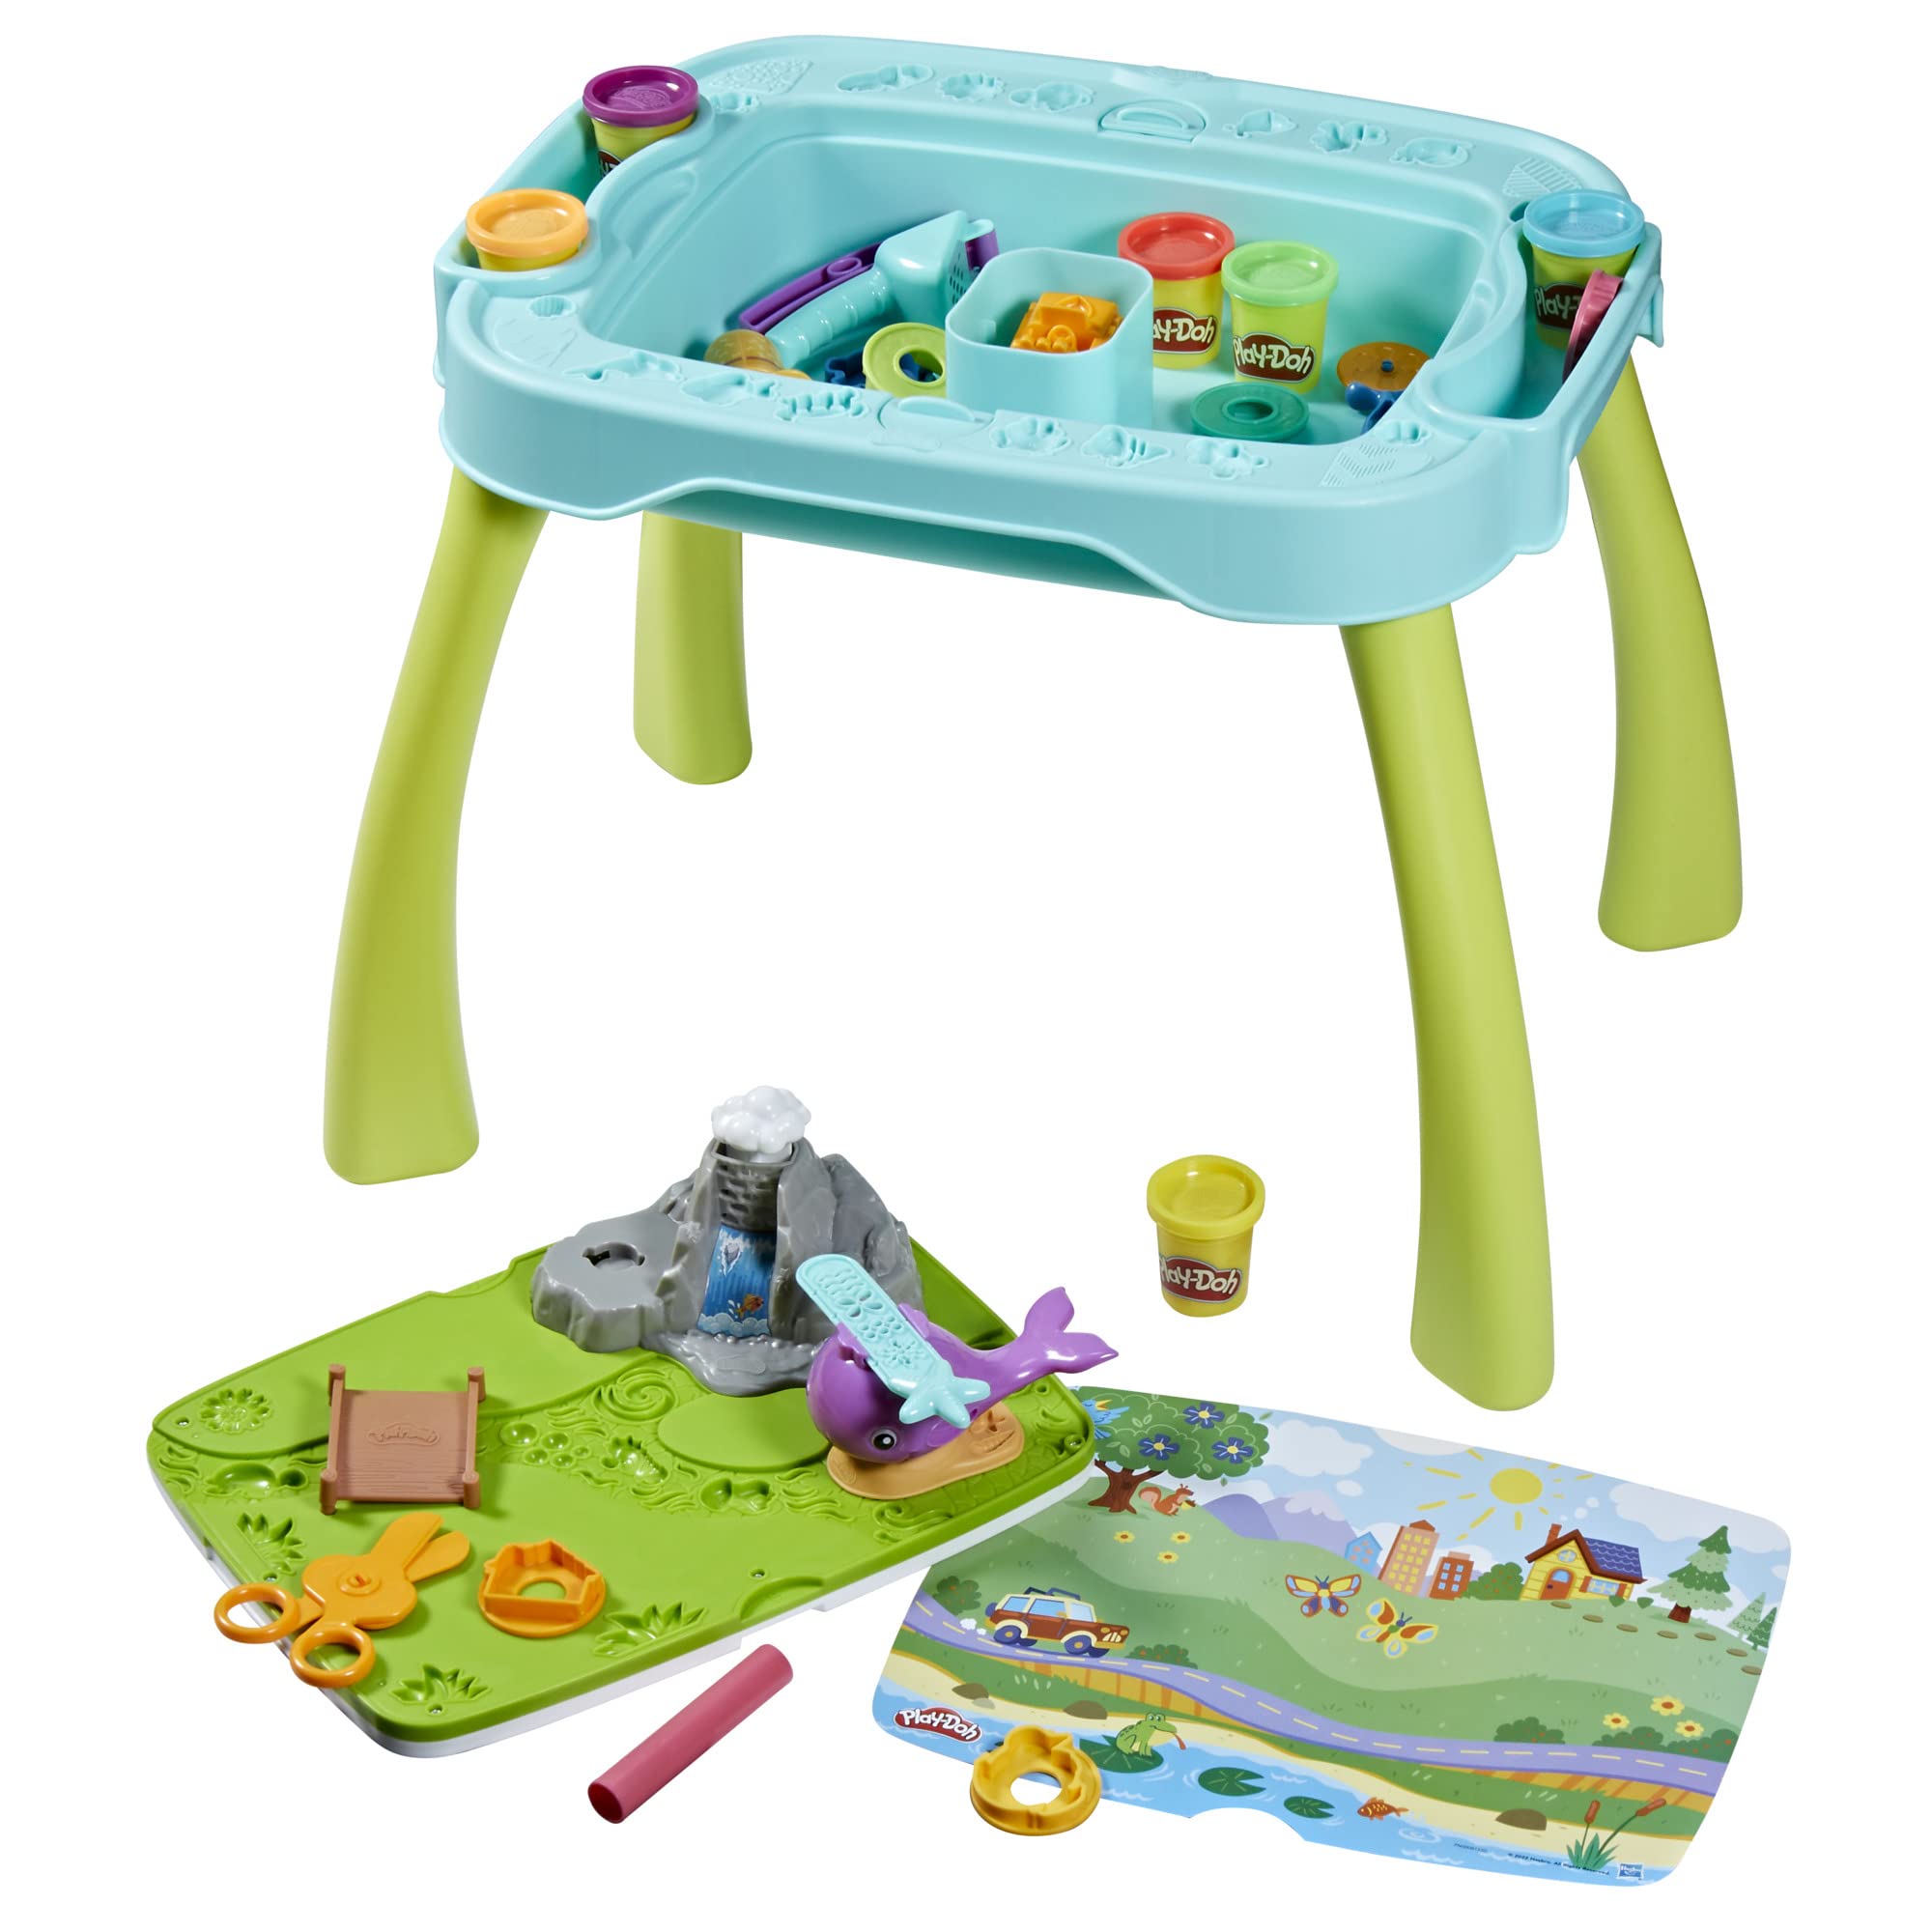 Play-Doh All-in-One Creativity Starter Station Activity Table Playset, Preschool Toys, Starter Sets, Kids Arts & Crafts, Ages 3+